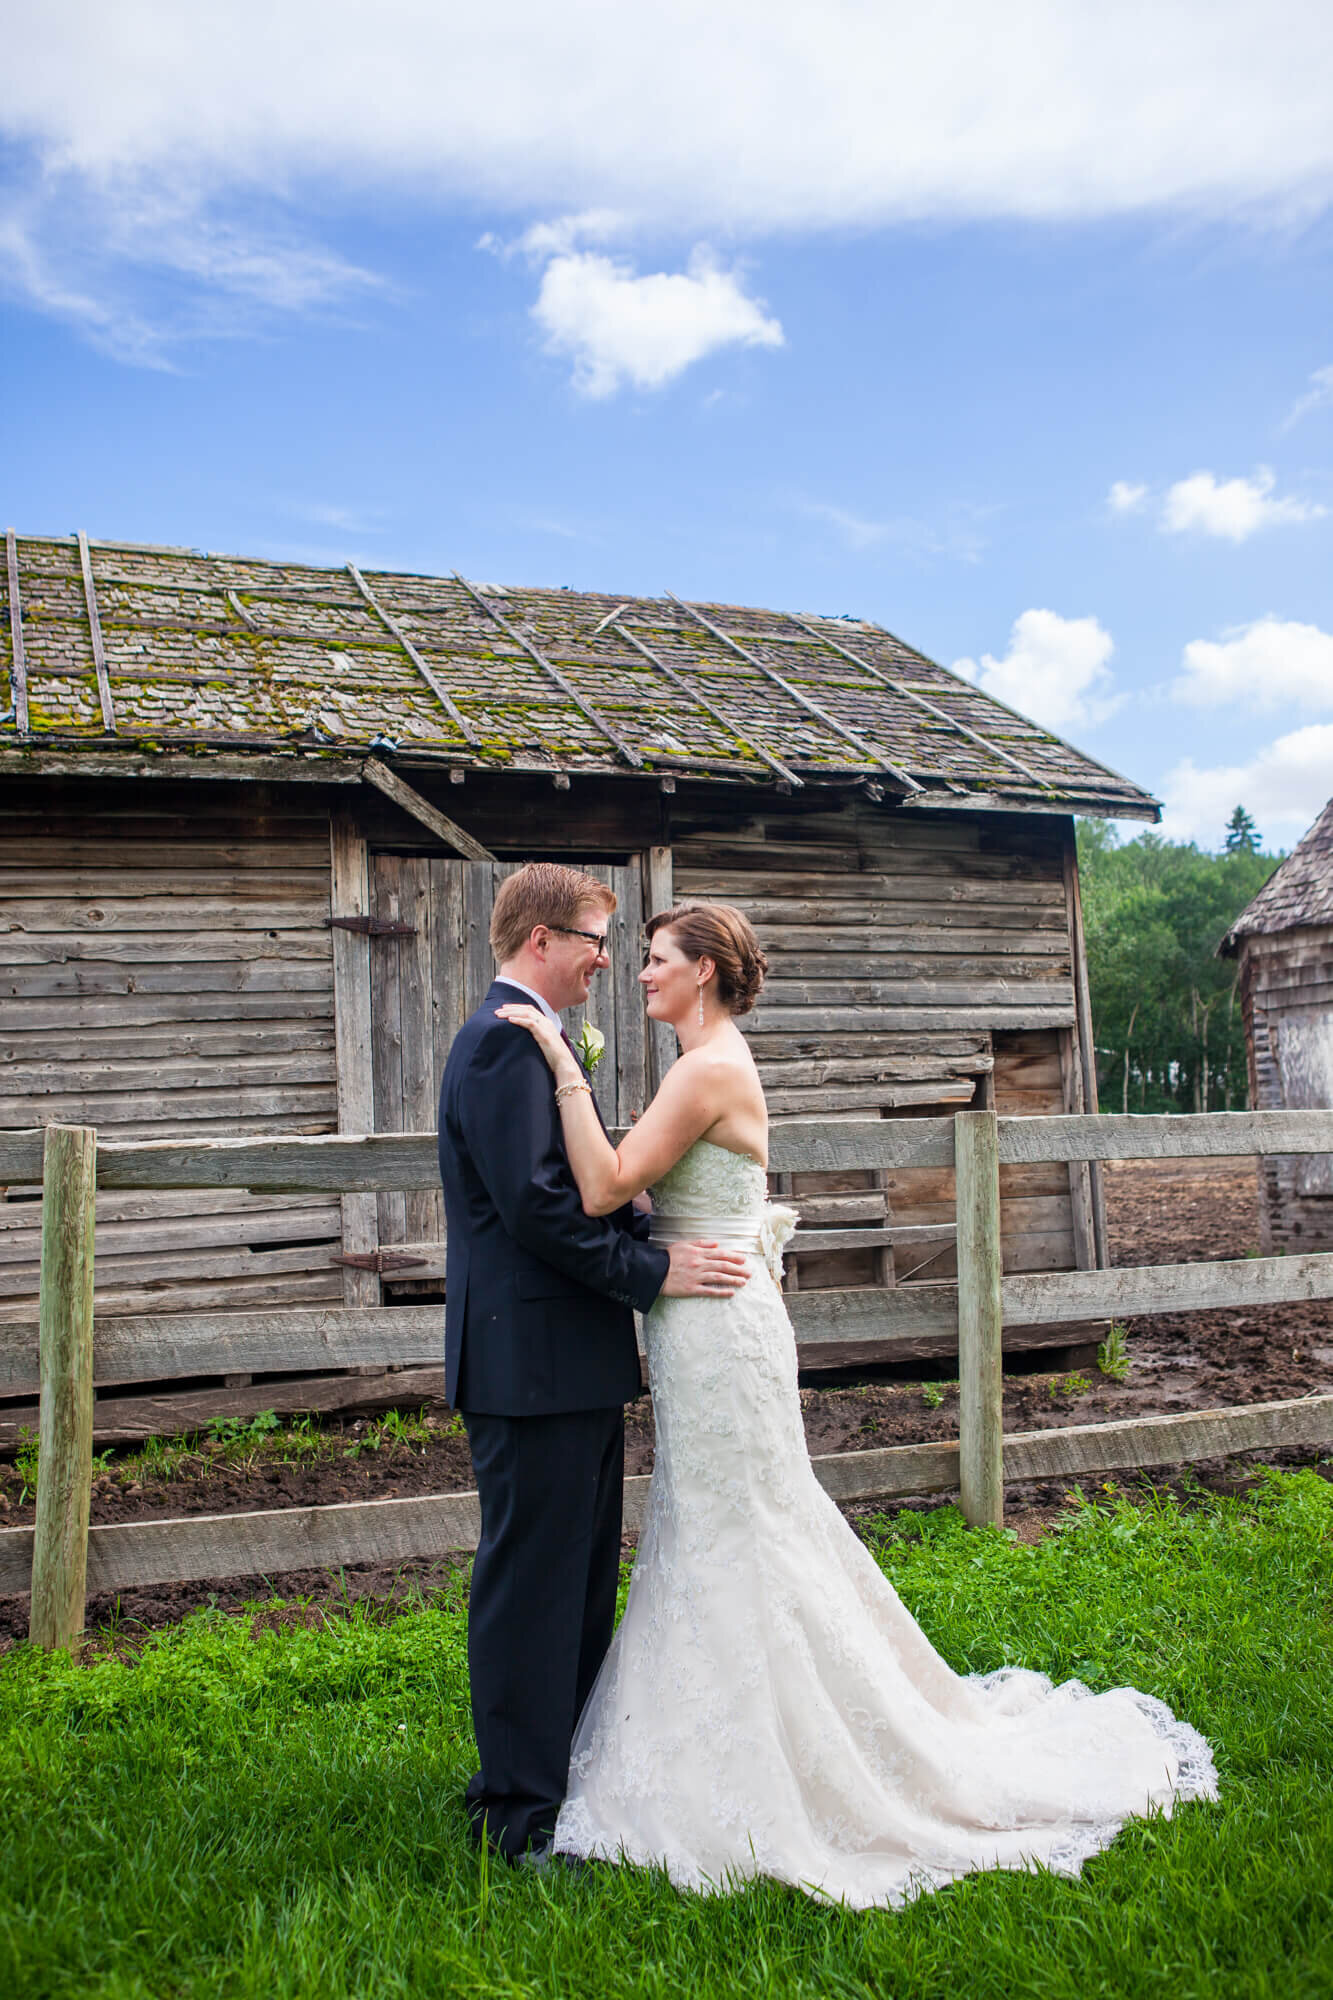 Bride and Groom posed in front of Rustic Building